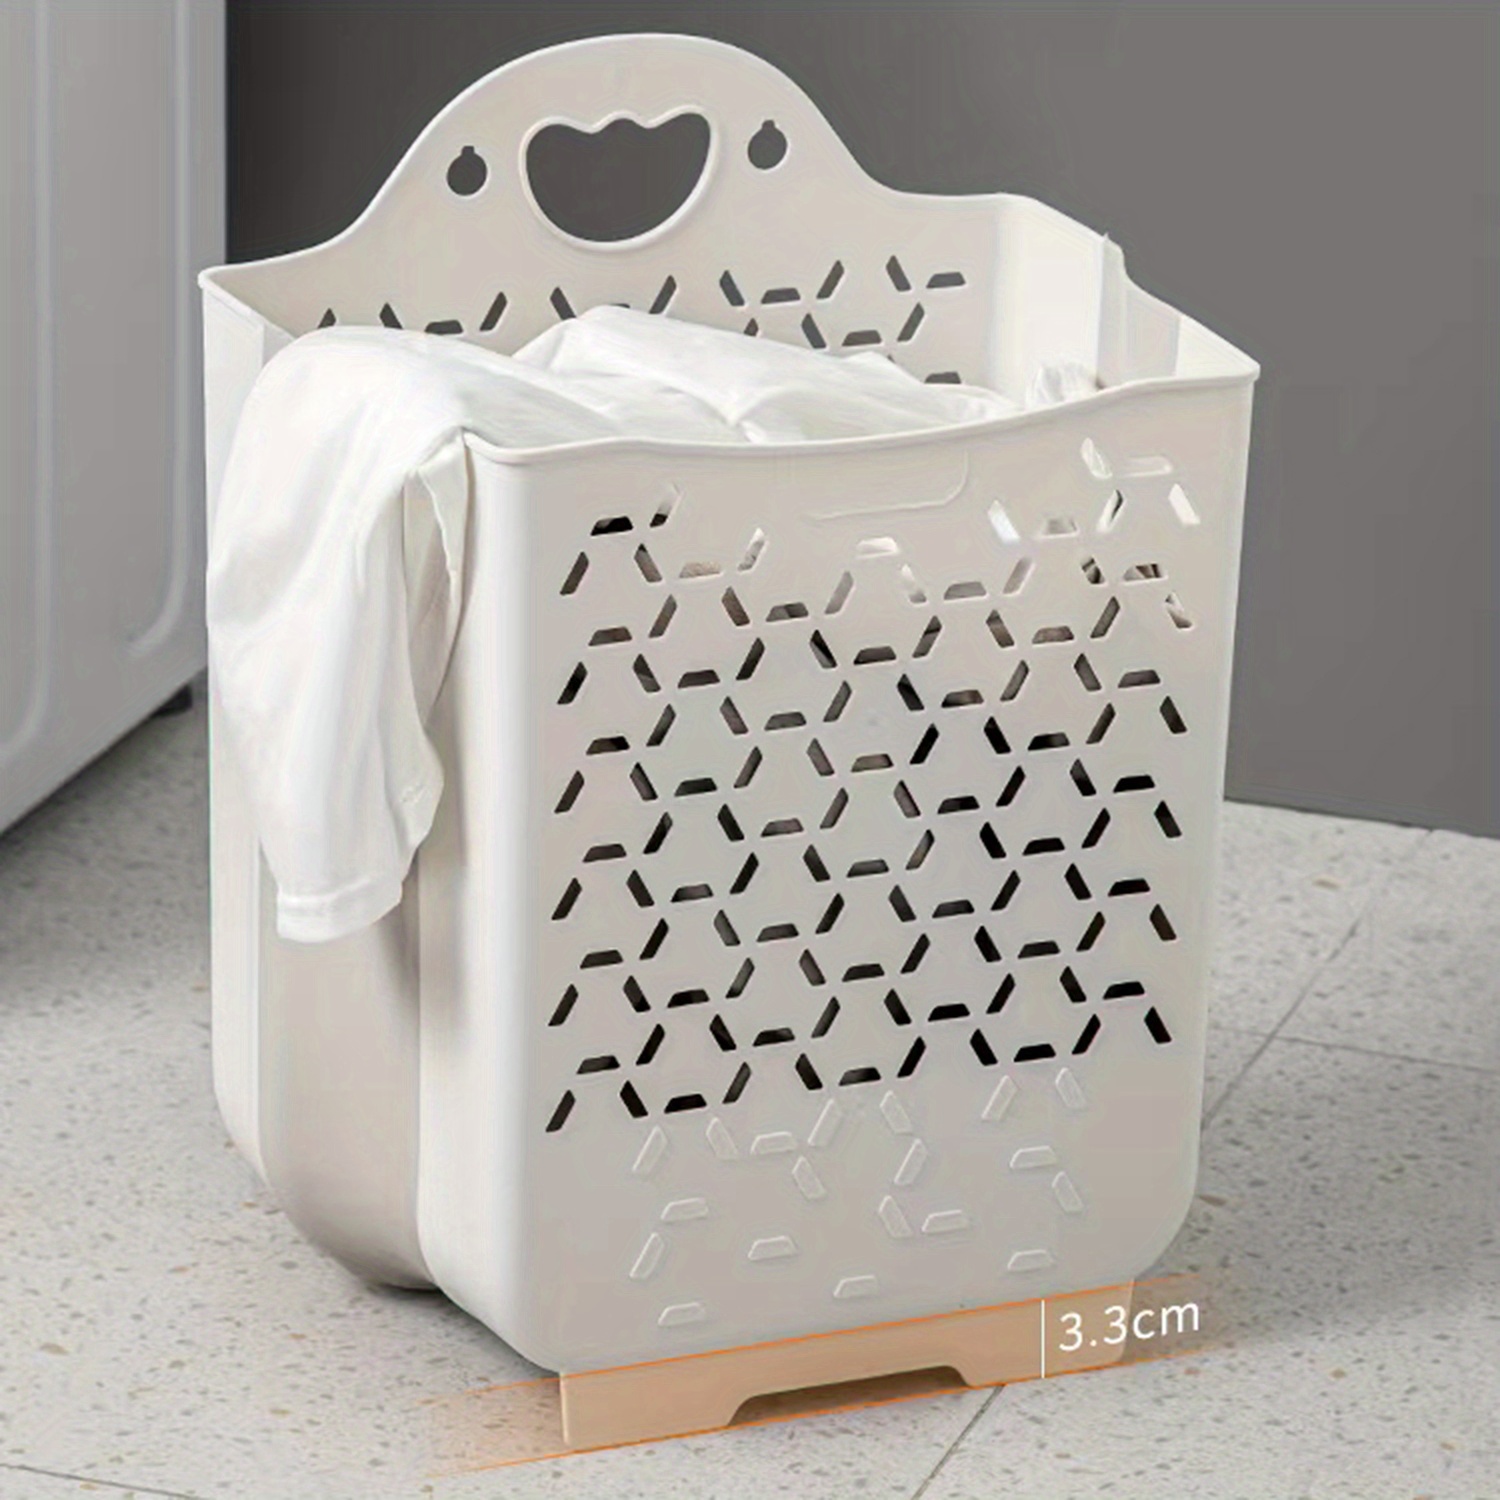 Tongina Portable Laundry Hamper Storage Bin Kids Toys Bags Barrel Organizer Blanket Clothes Basket for Camping Living Room Travel College Dormitorie White